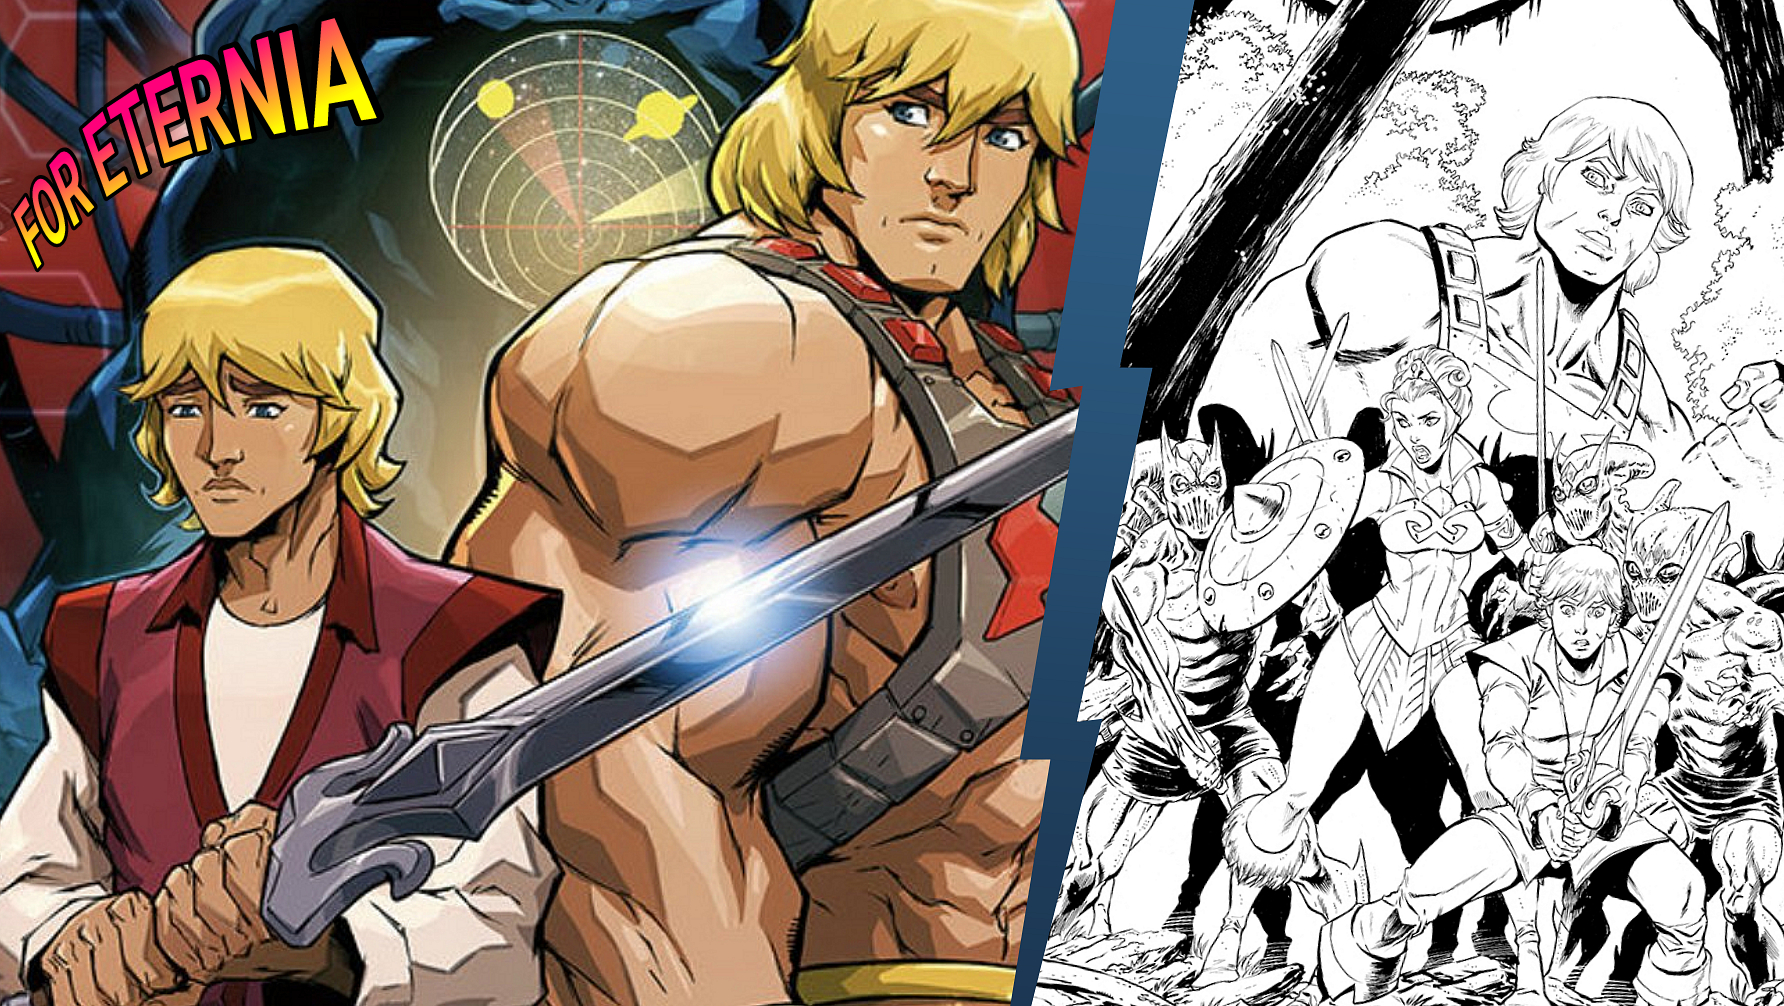 Issue 2 Covers are finally revealed for “Masters of the Universe: Forge of Destiny” including Tim Seeley’s